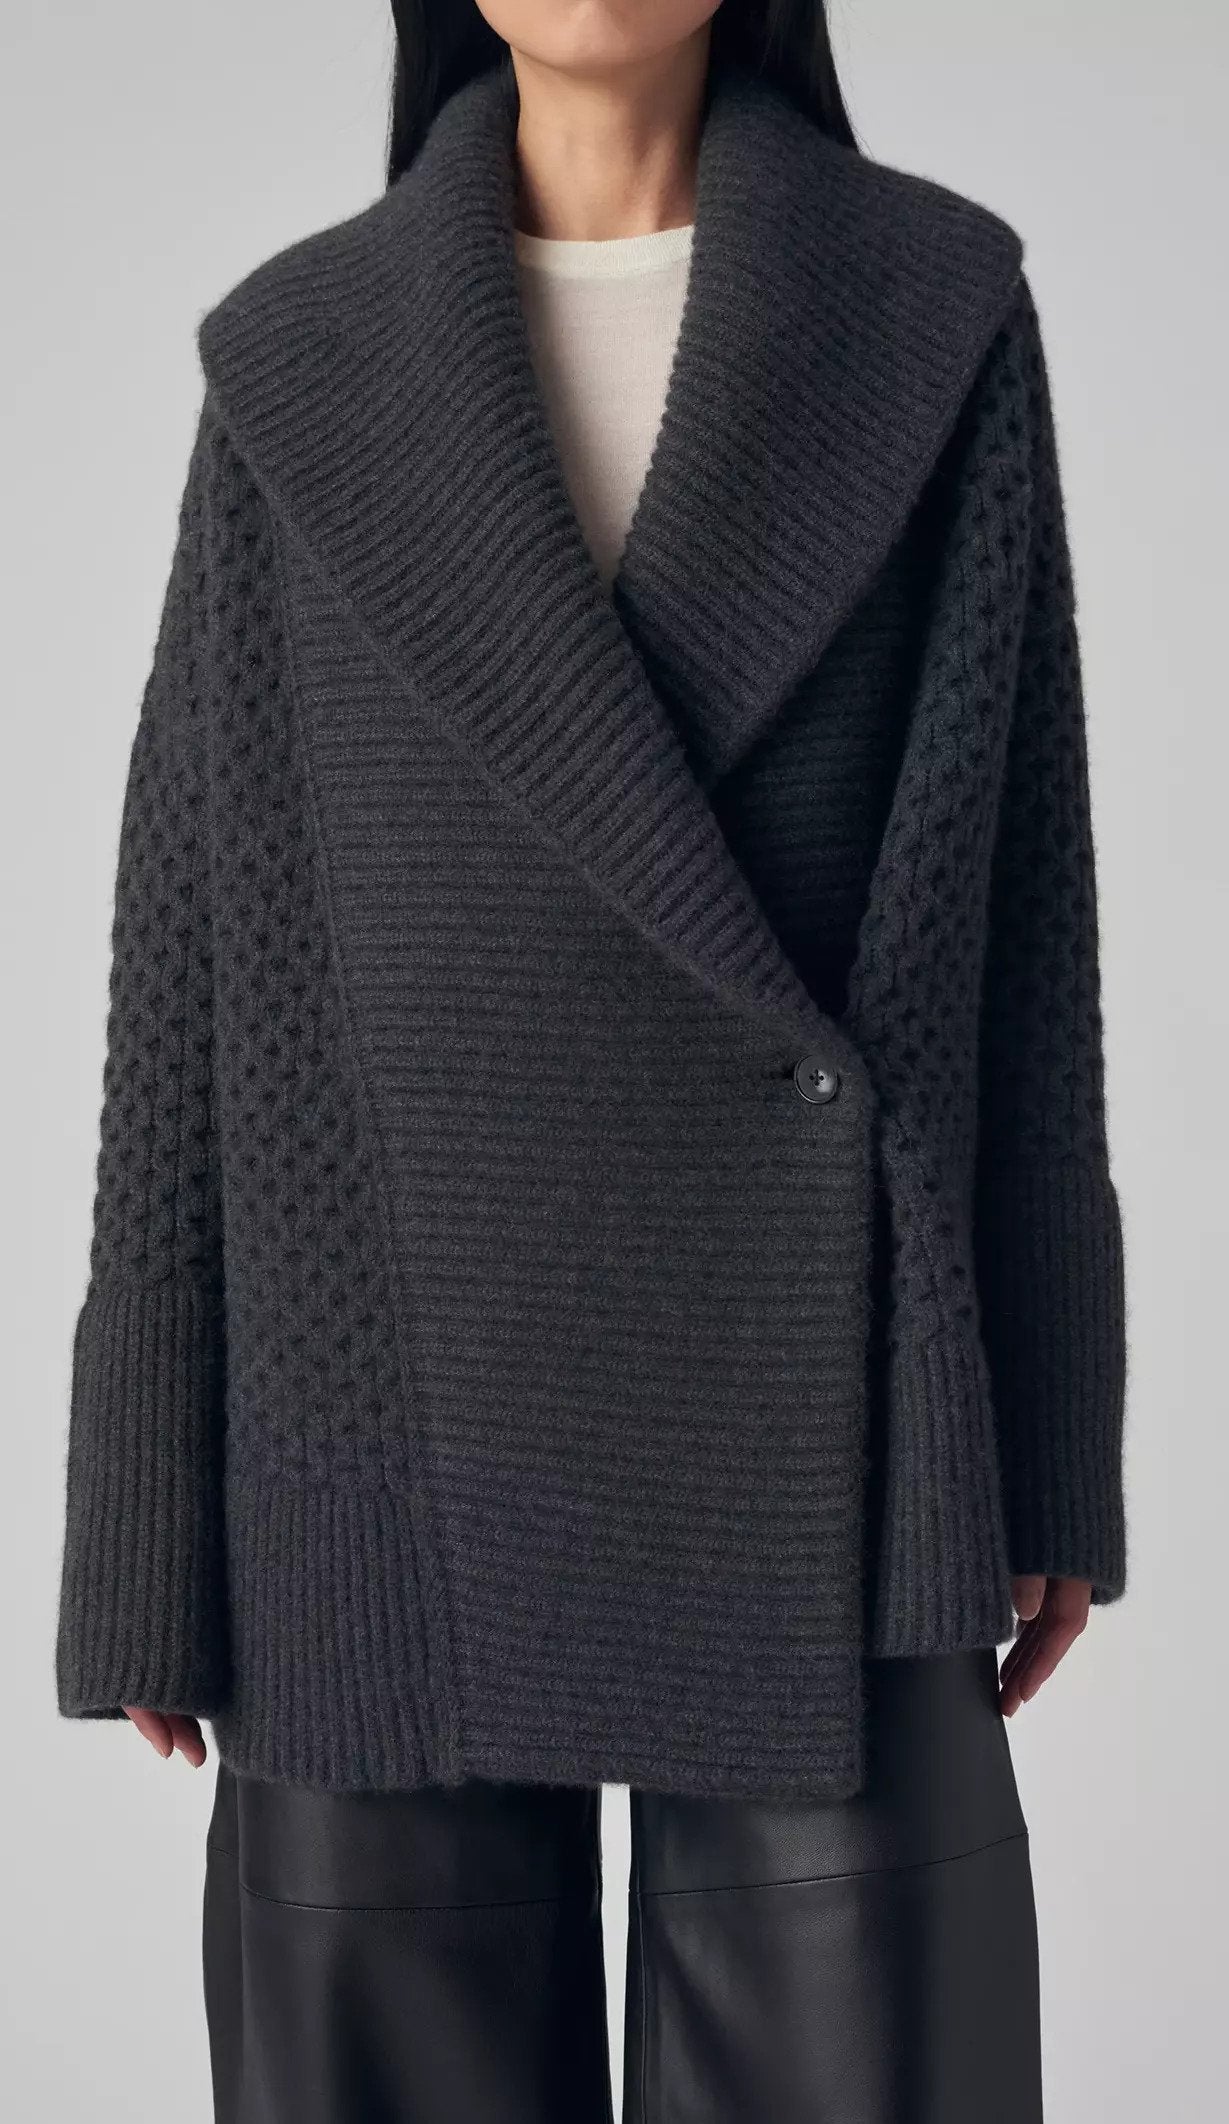 CO Shawl Cardigan in Cashmere